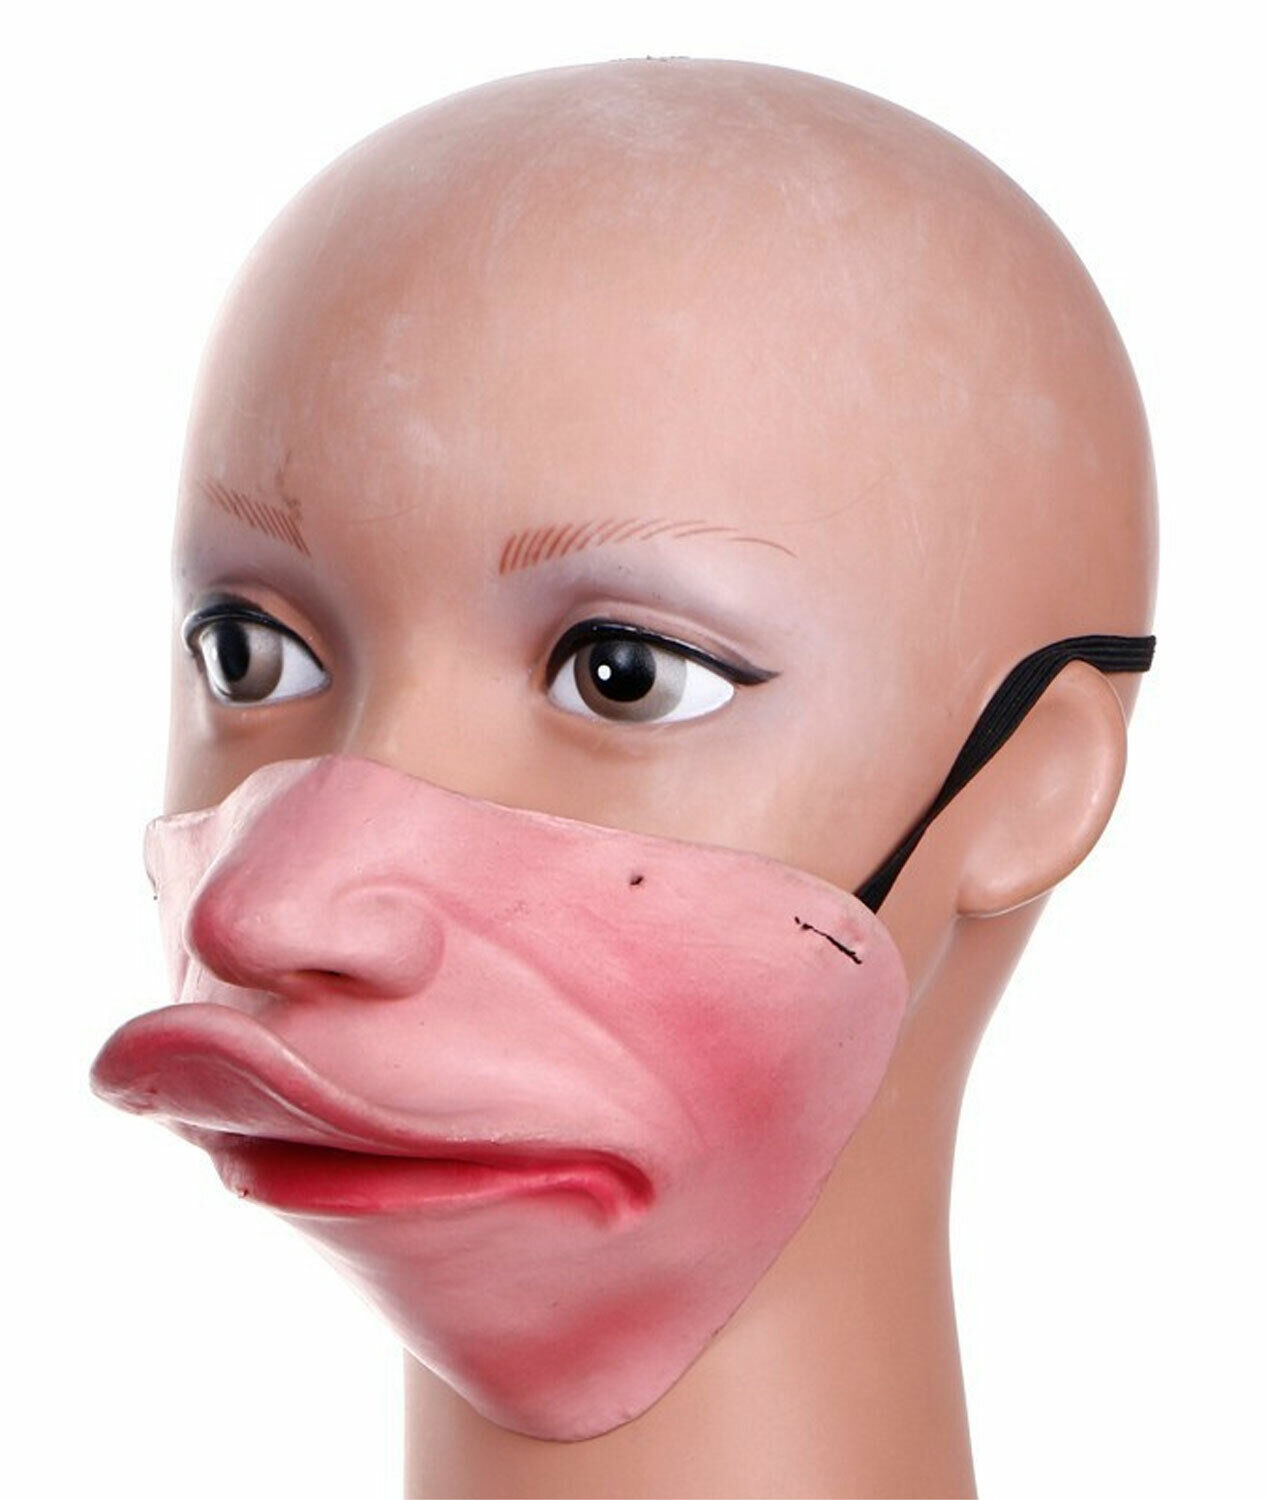 Funny Duck LATEX LOWER HALF FACE MASK Freak Halloween Costume Mouth Cover -DUCKY